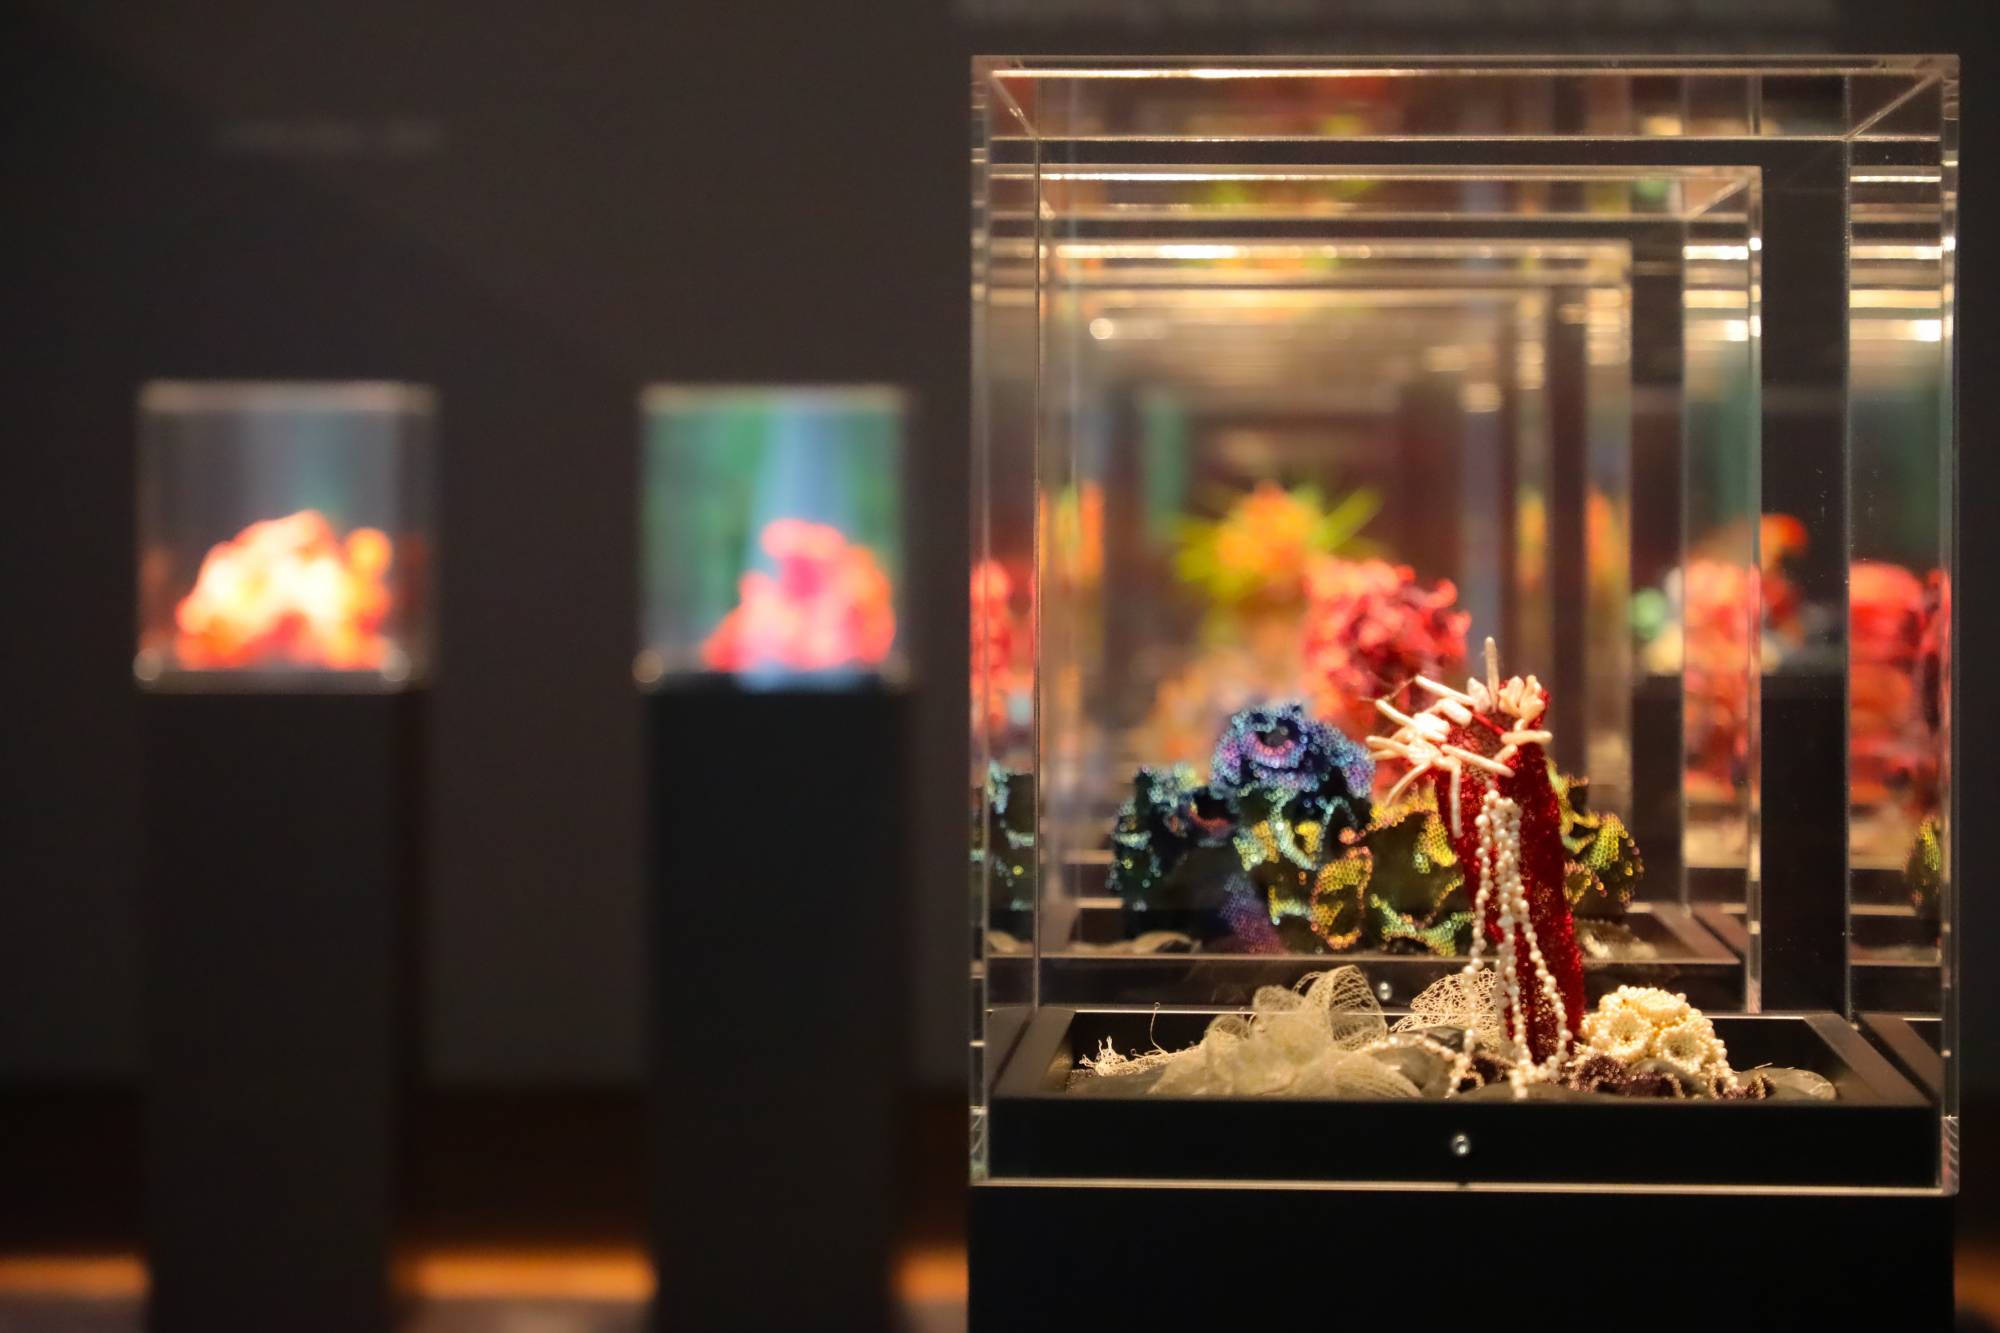 sculptures of crochet and beaded corals in vitrines